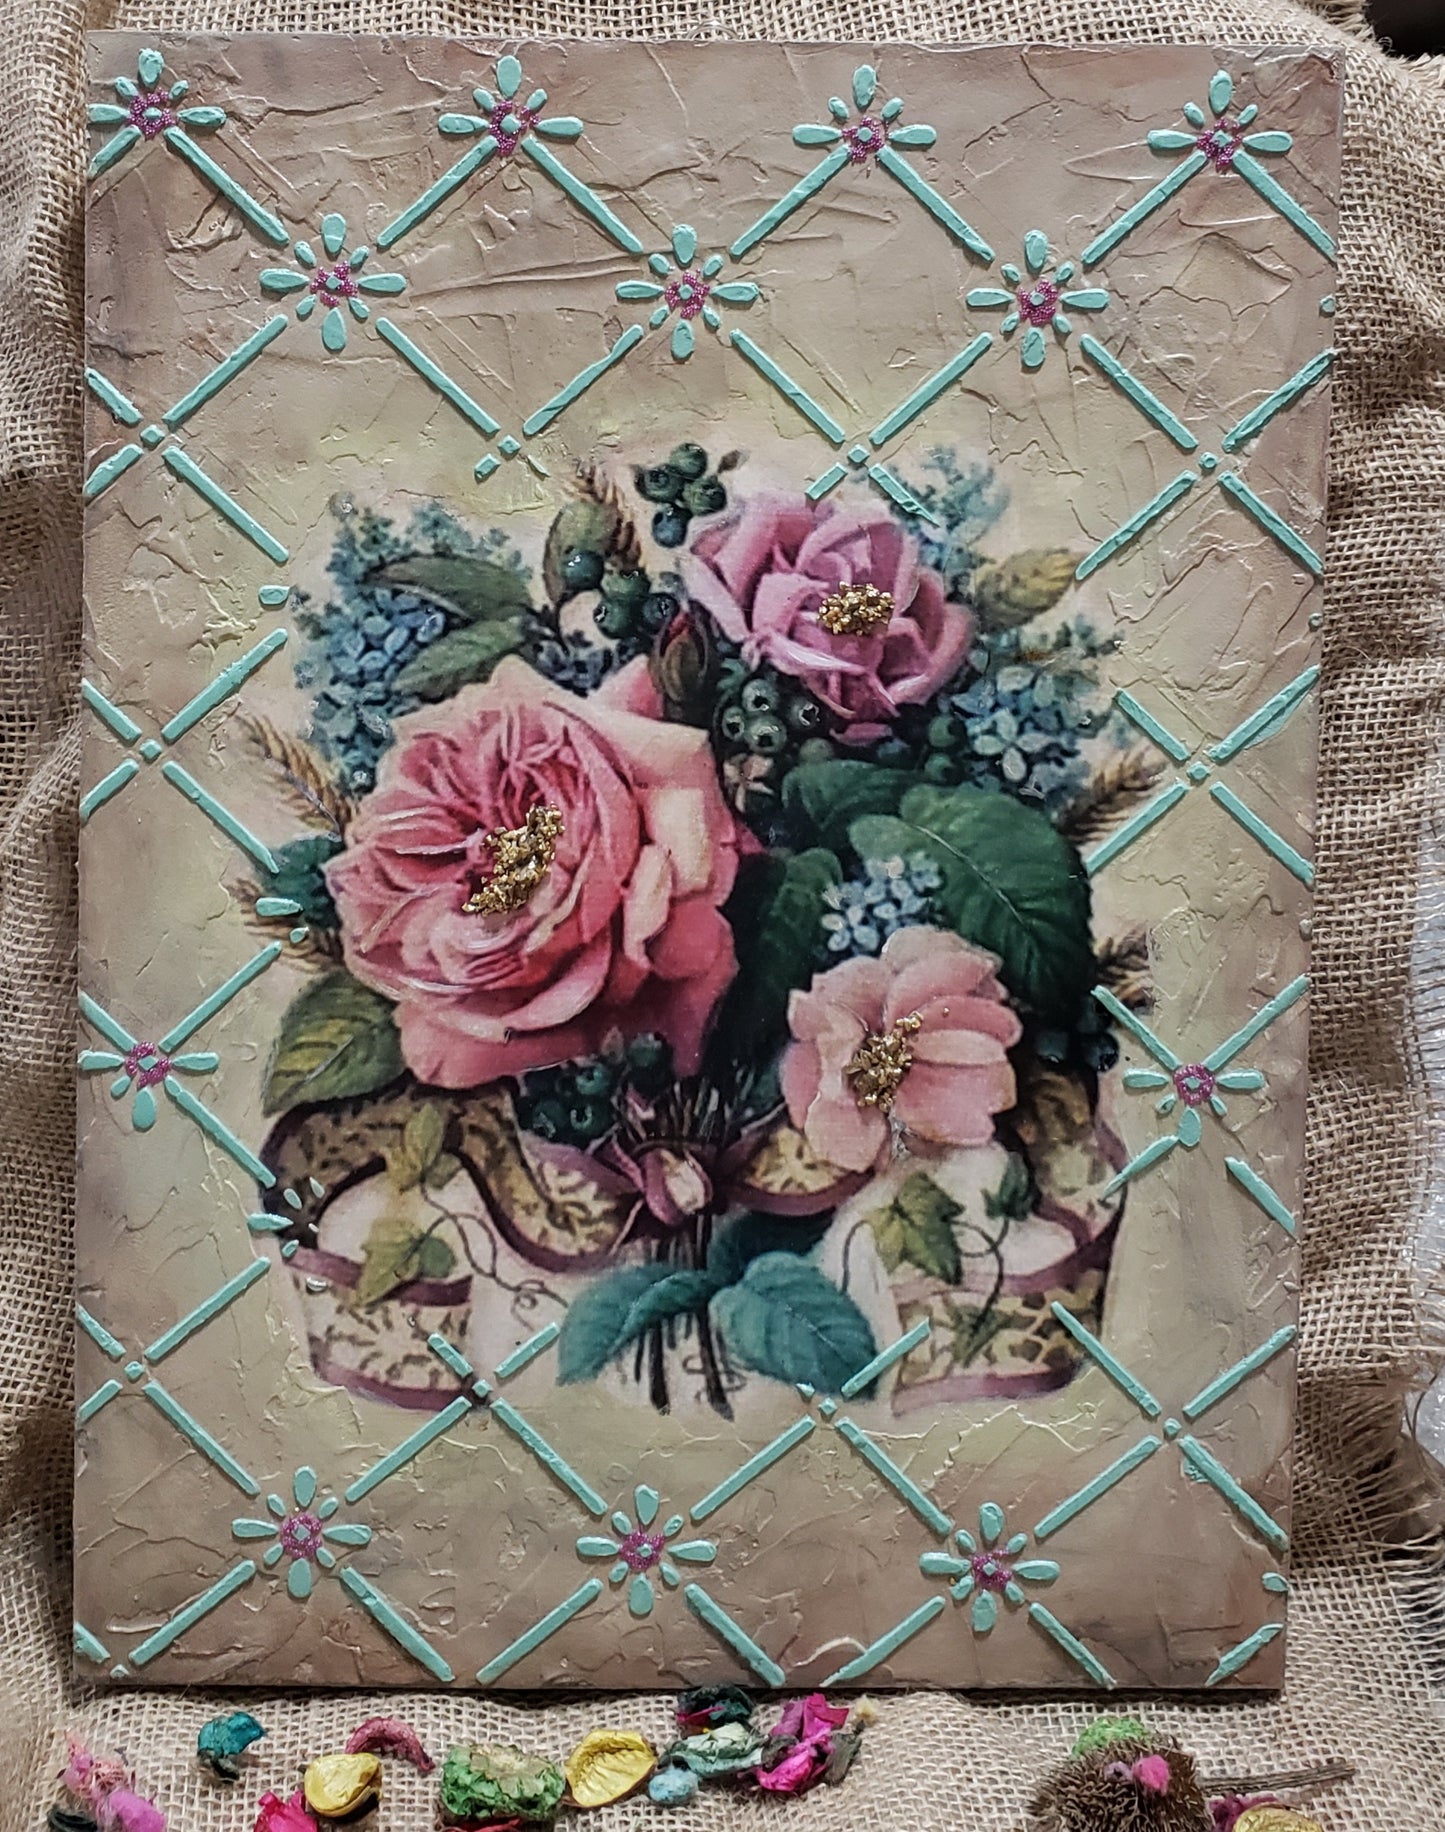 Oriental Wall Art - Roses - Large Size